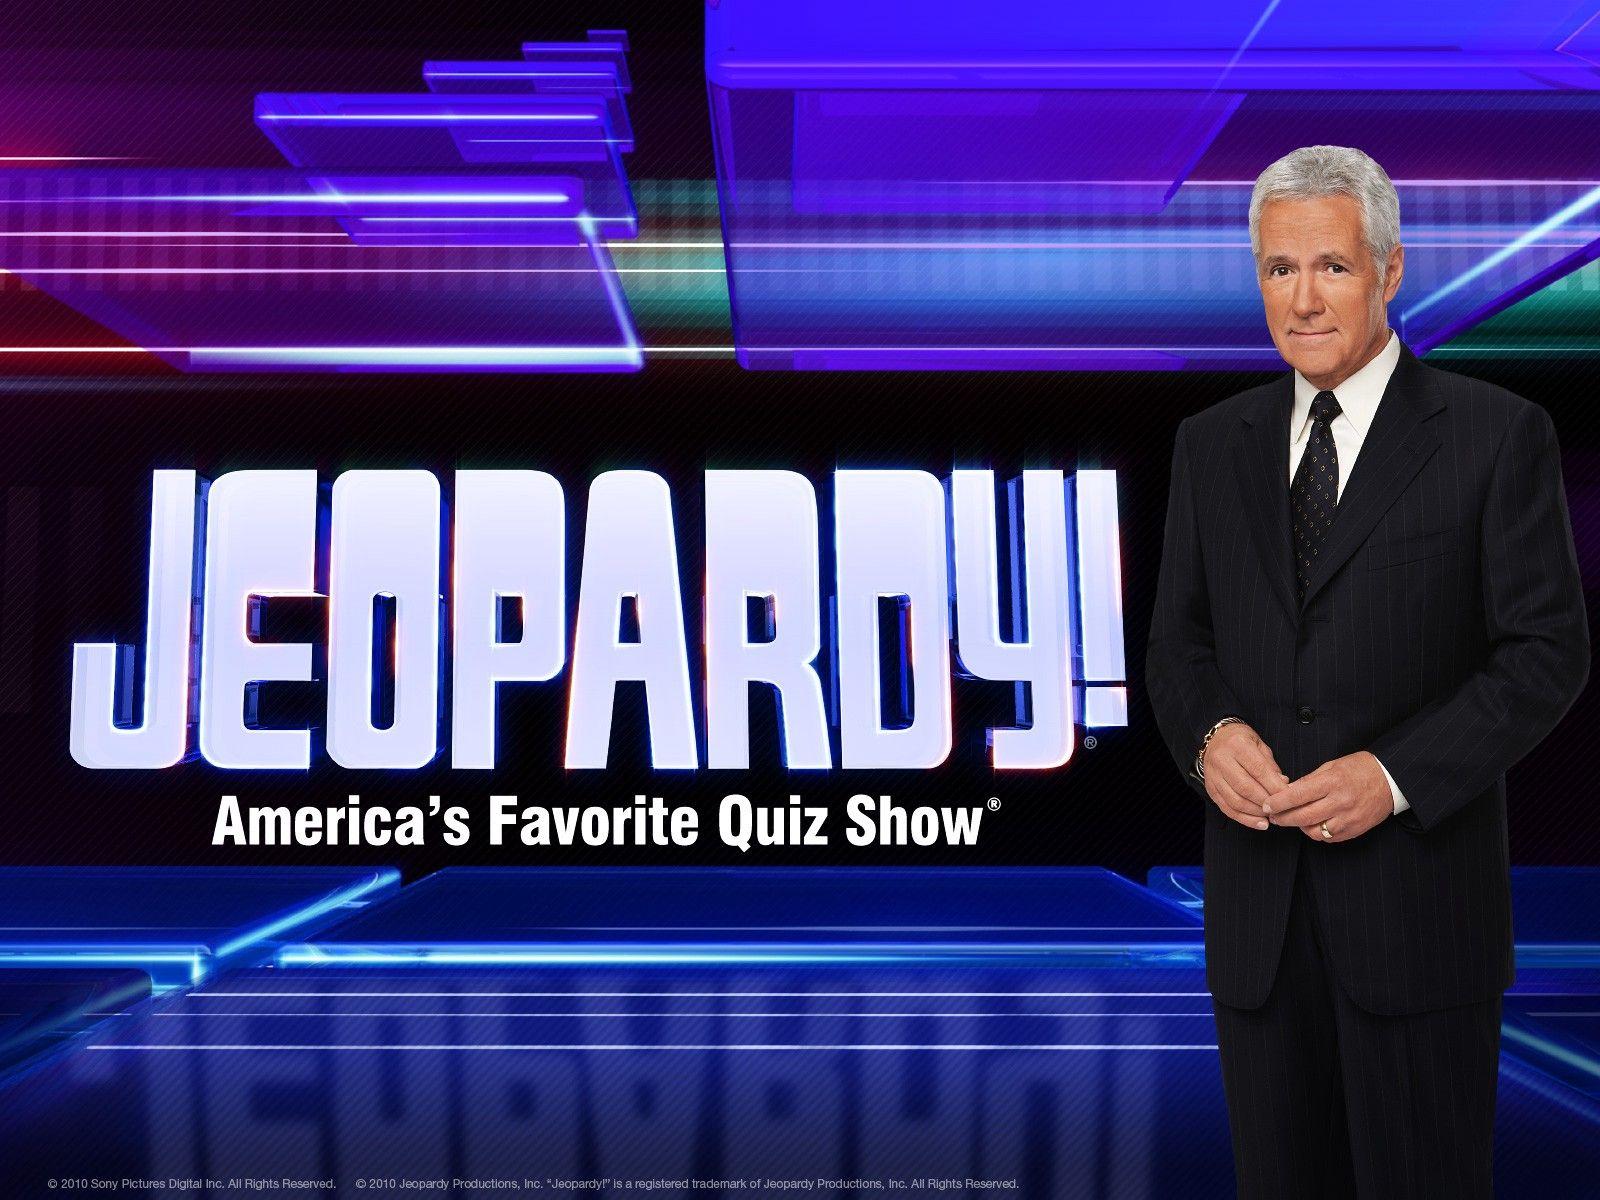 Jeopardy Game Show Logo - Trump Makes Final “Jeopardy!” Appearance Before Taking Office